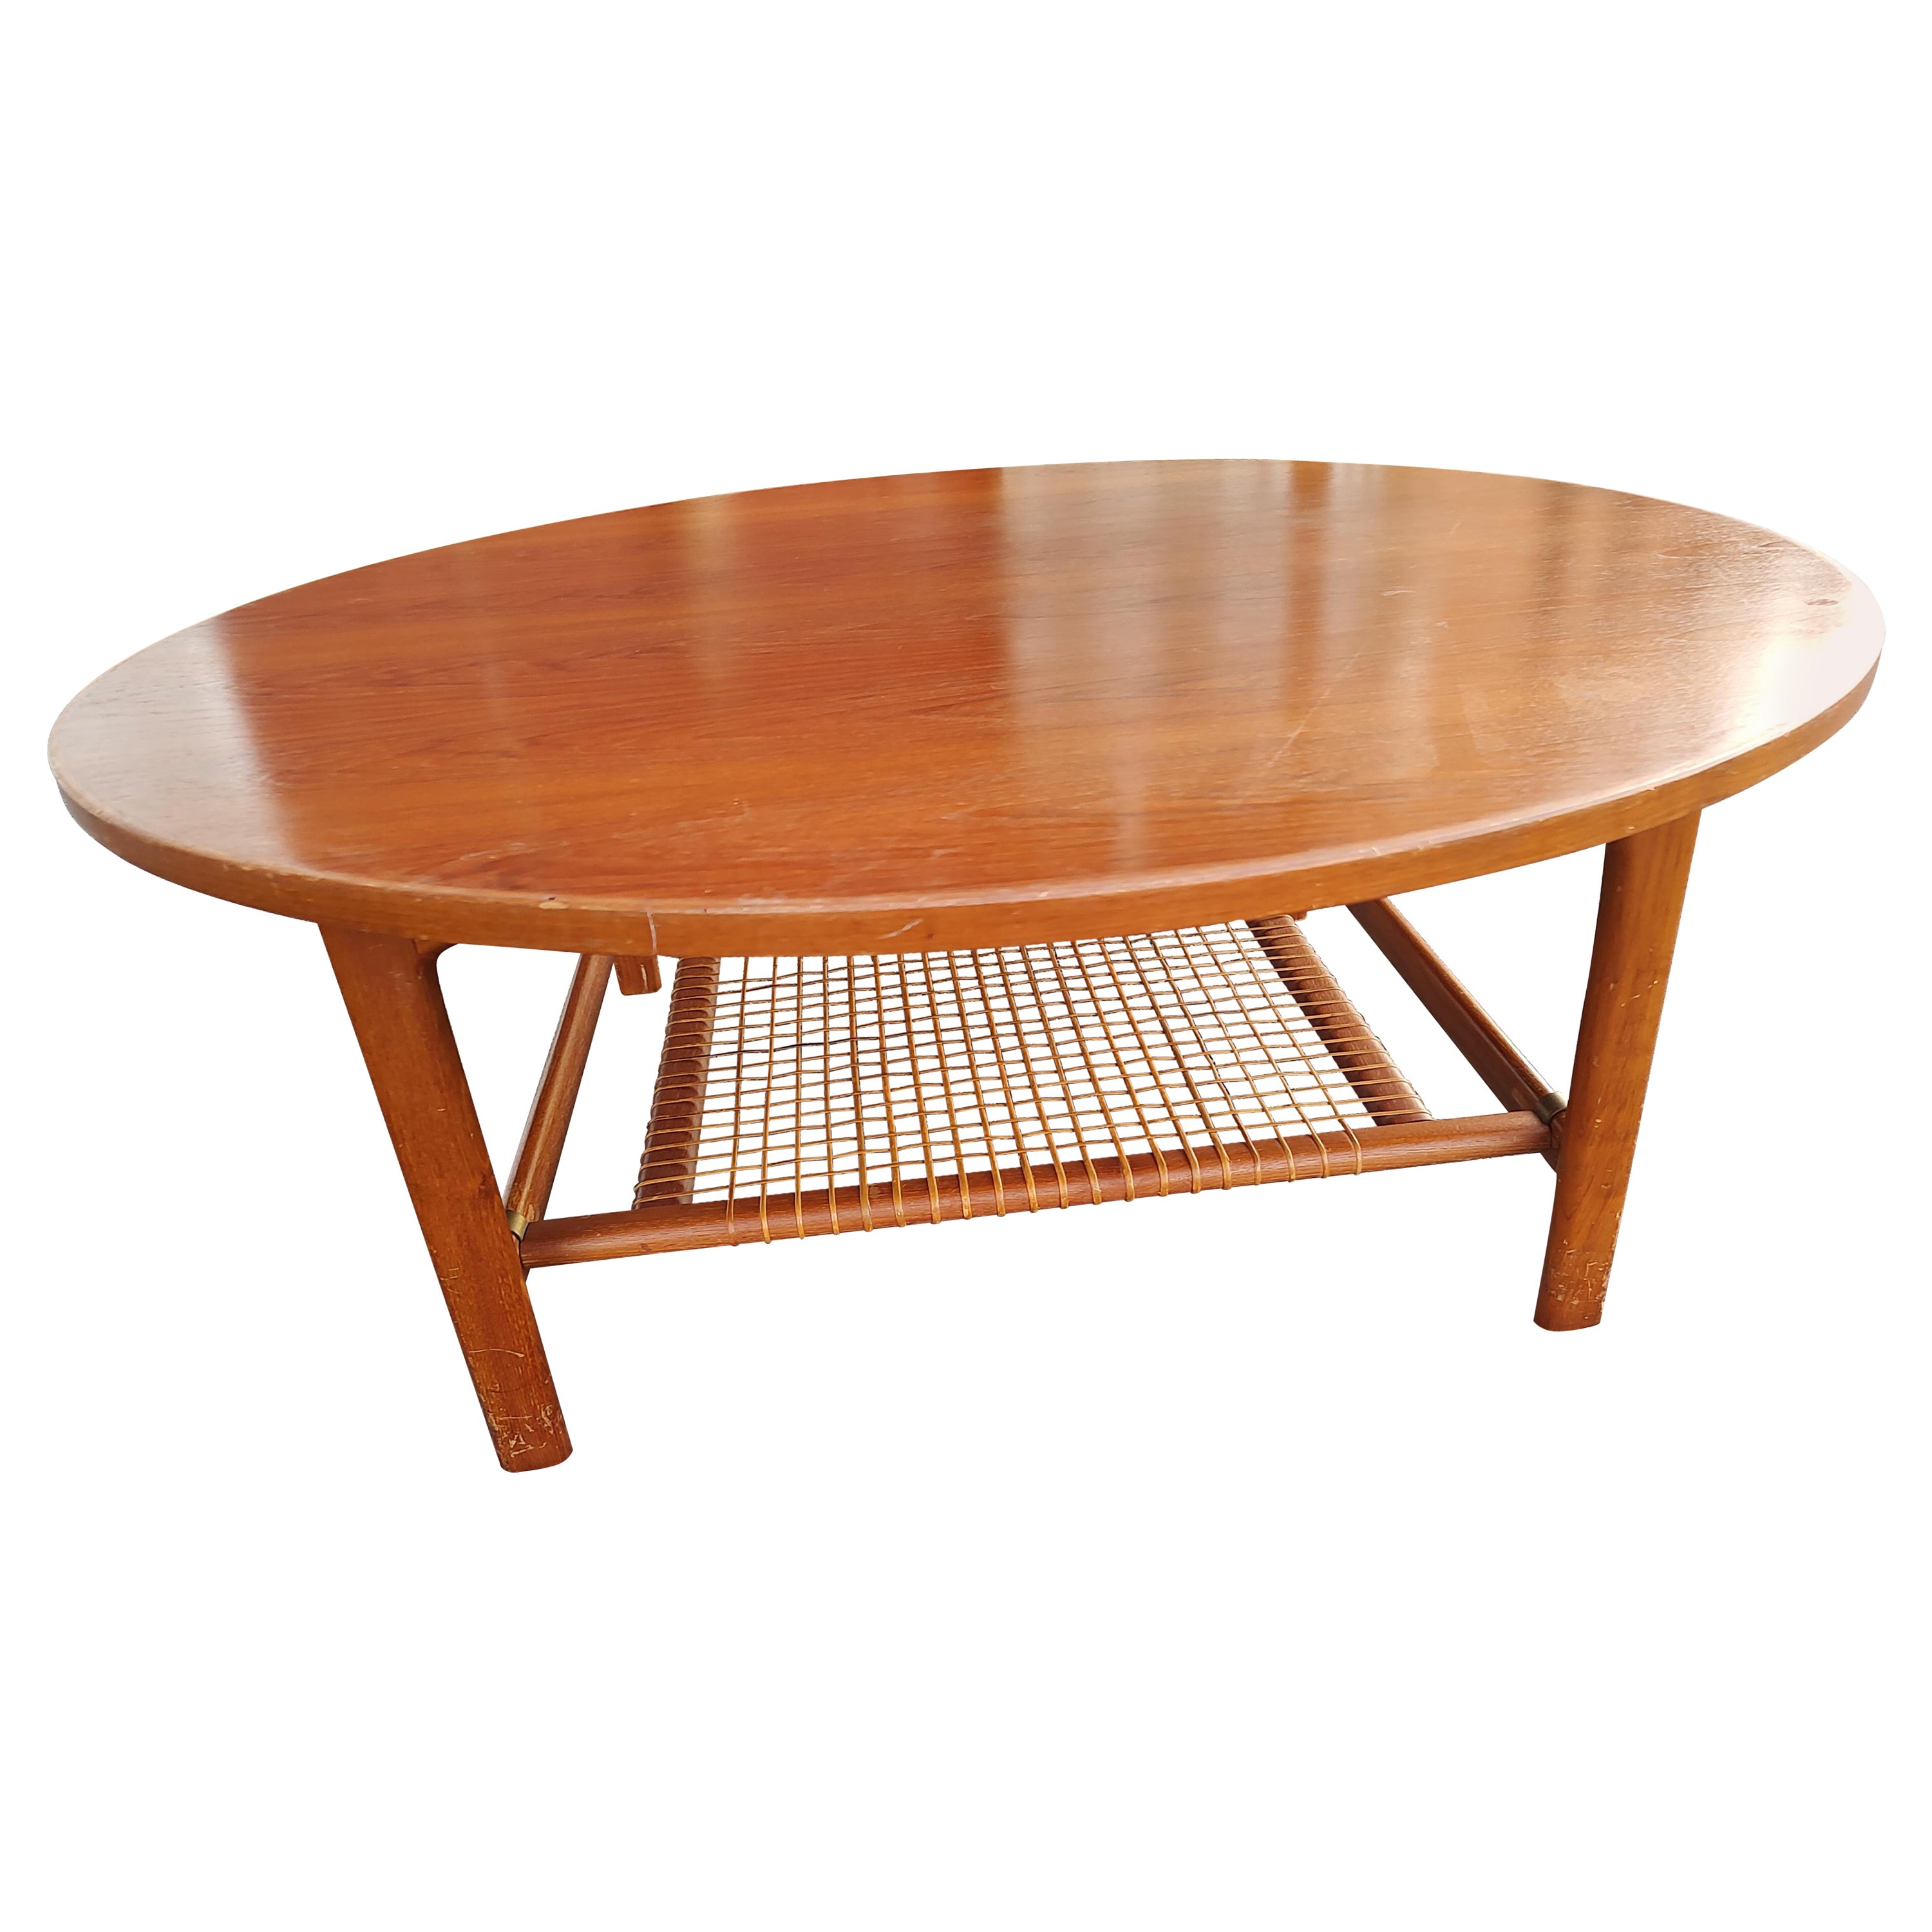 Mid-Century Modern Teak with Woven Shelf Cocktail Table by Dux Sweden For Sale